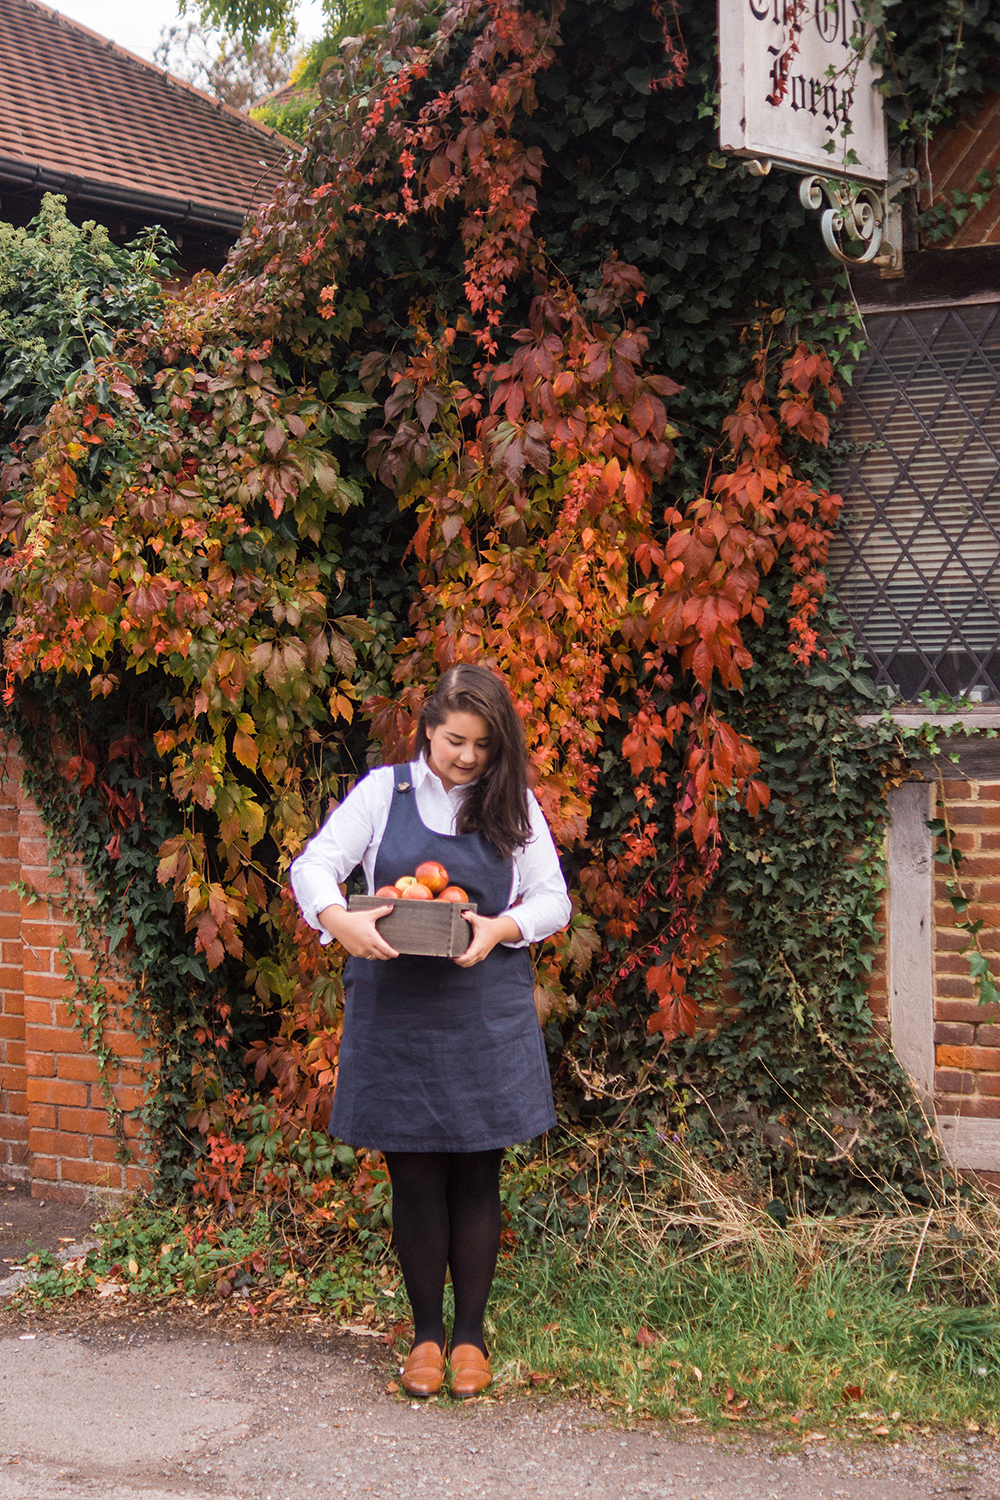 Joanie-pinafore-dress-tweed-jacket-autumn-ootd-Barely-There-Beauty-blog